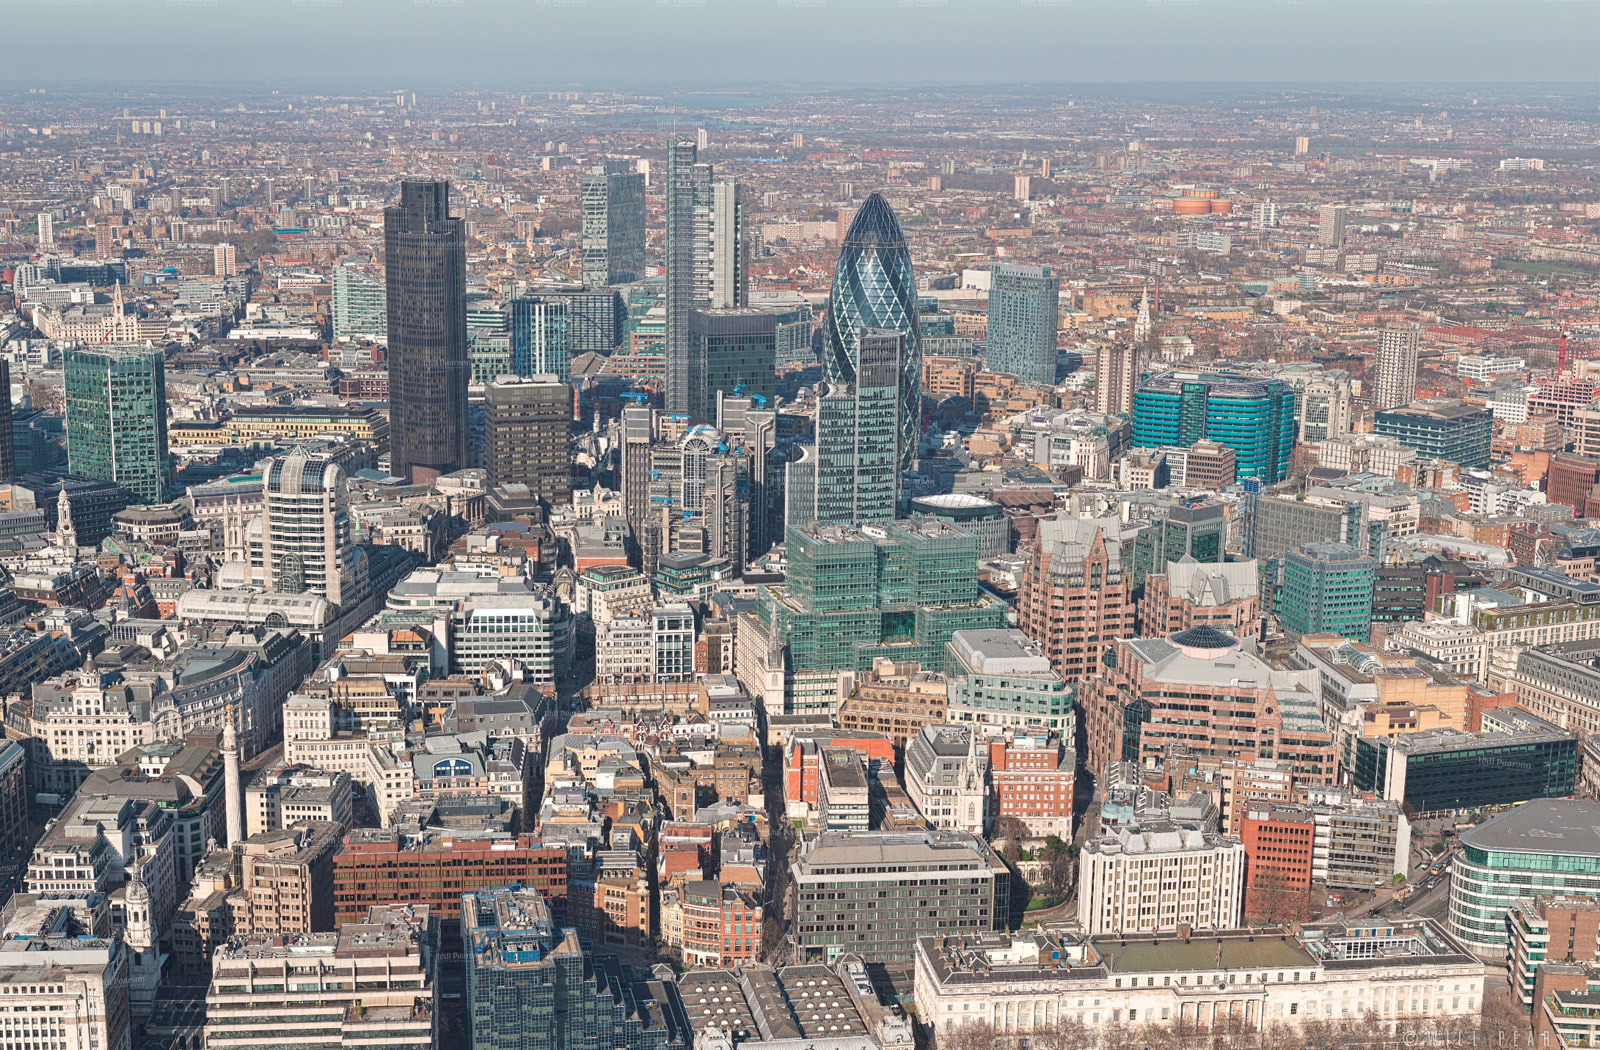 Gigapixel 360 Panorama from the Shard